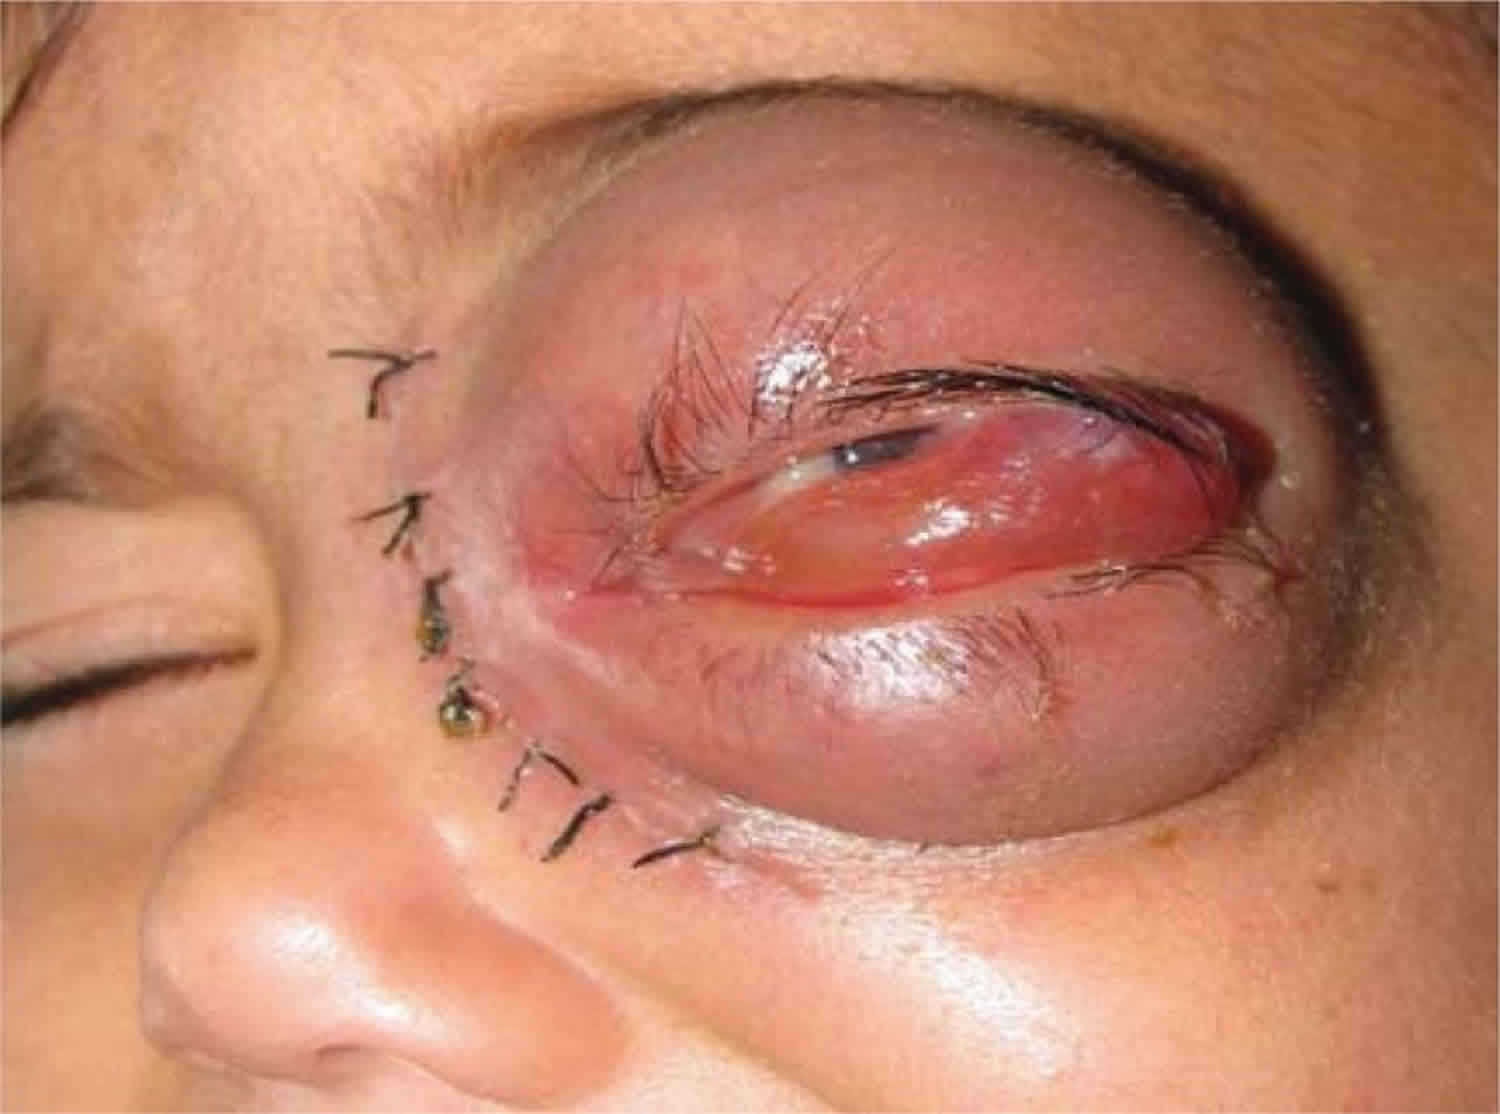 mucormycosis